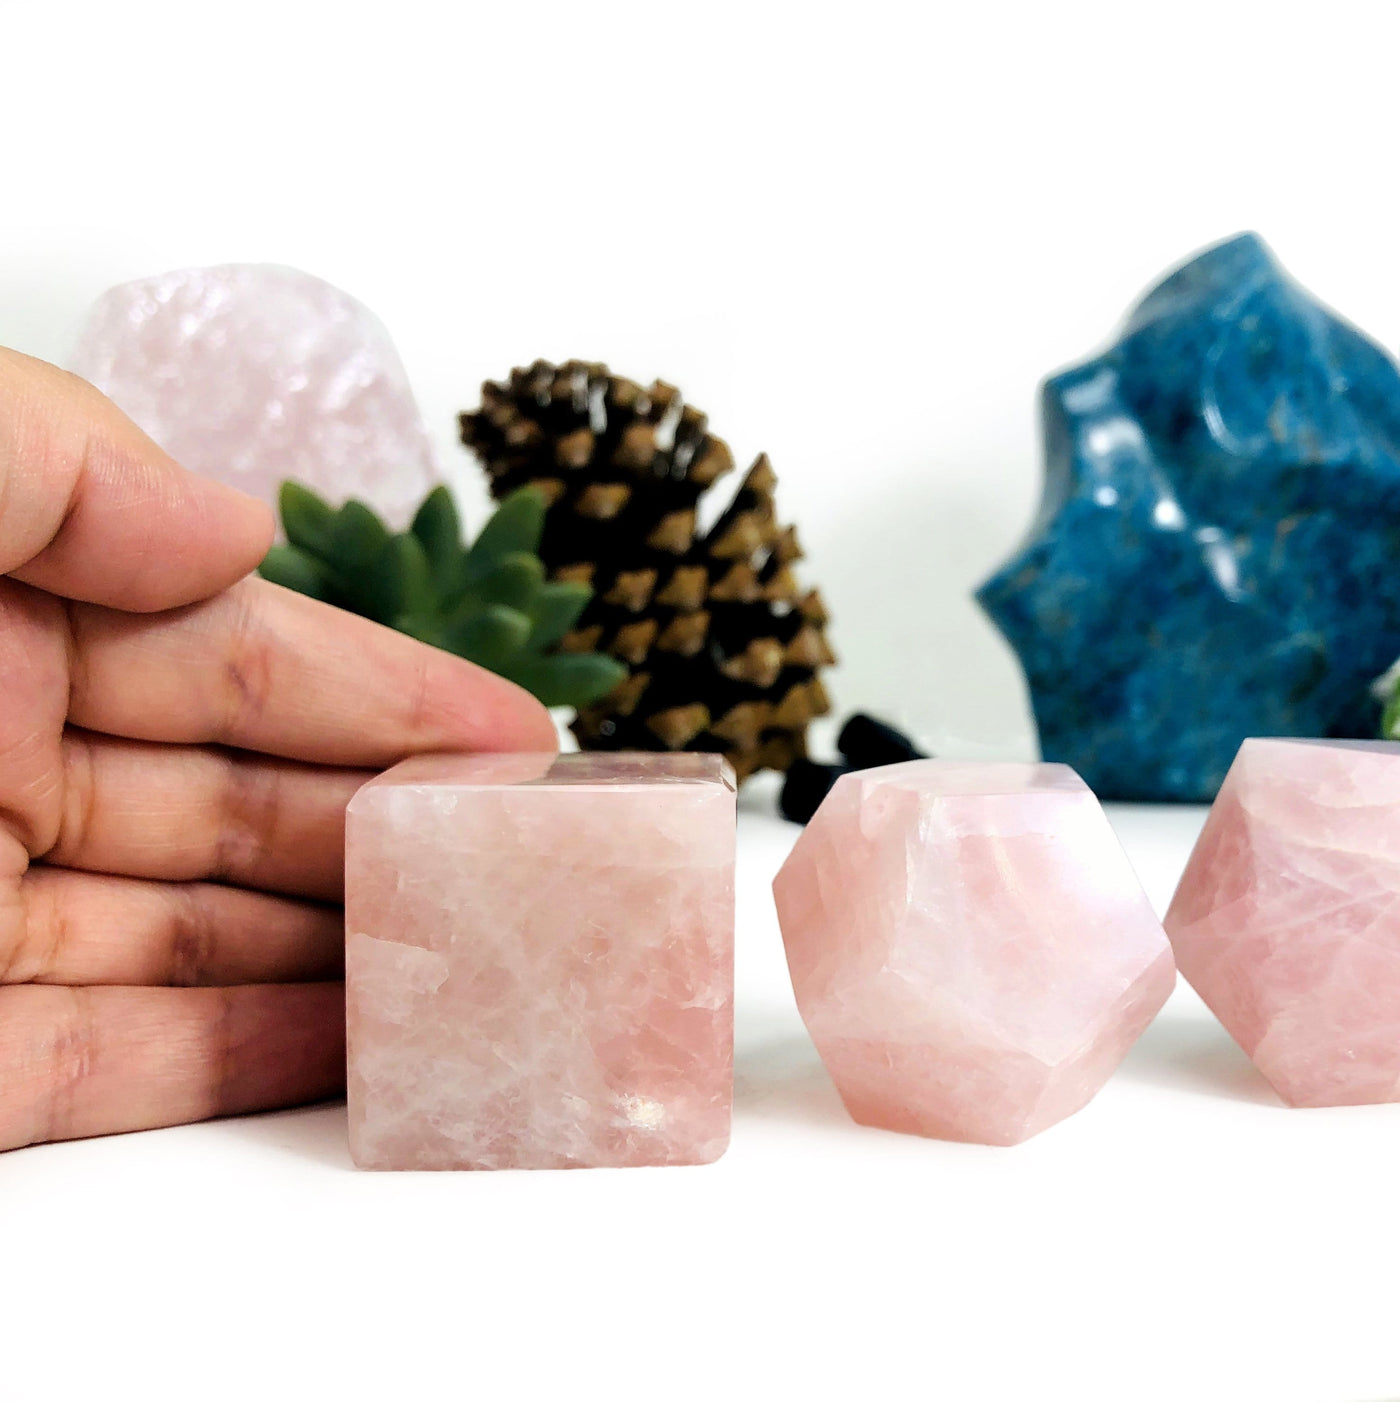 Hand touching Rose Quartz Sacred Geometry Meditation Set with decorations blurred in the background